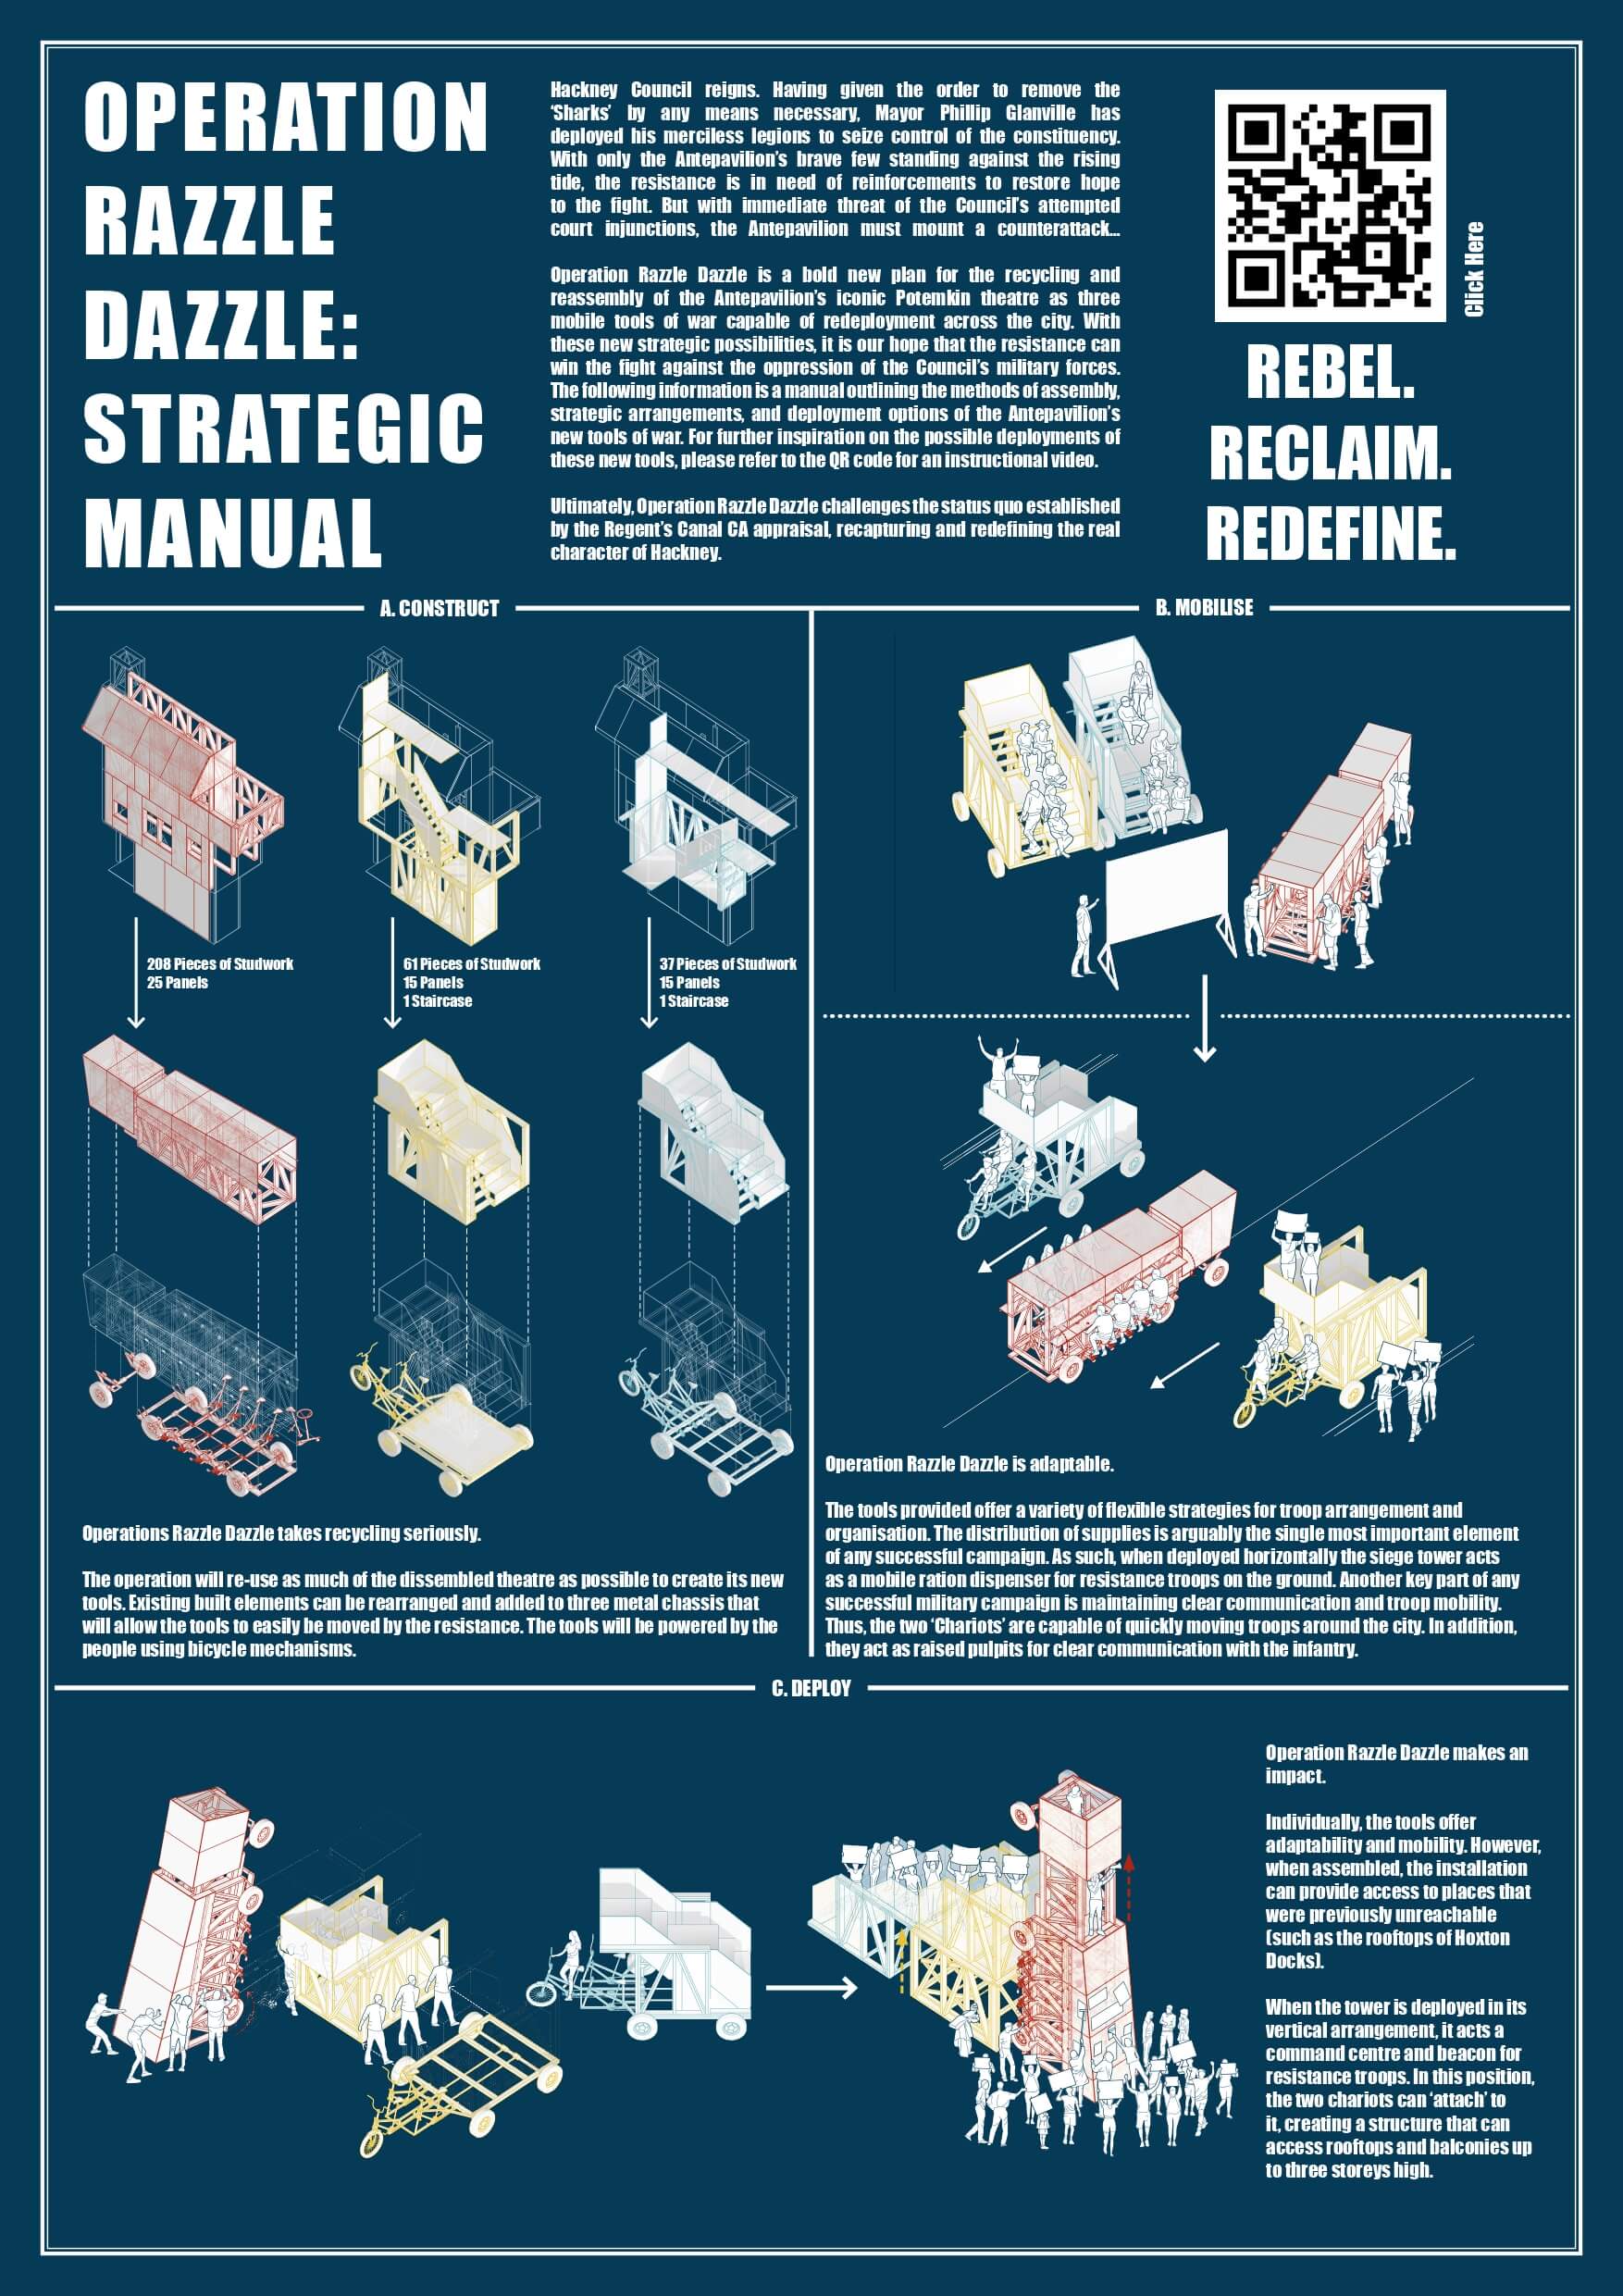 A single-page field manual for rapid urban deployment of reused festival structures